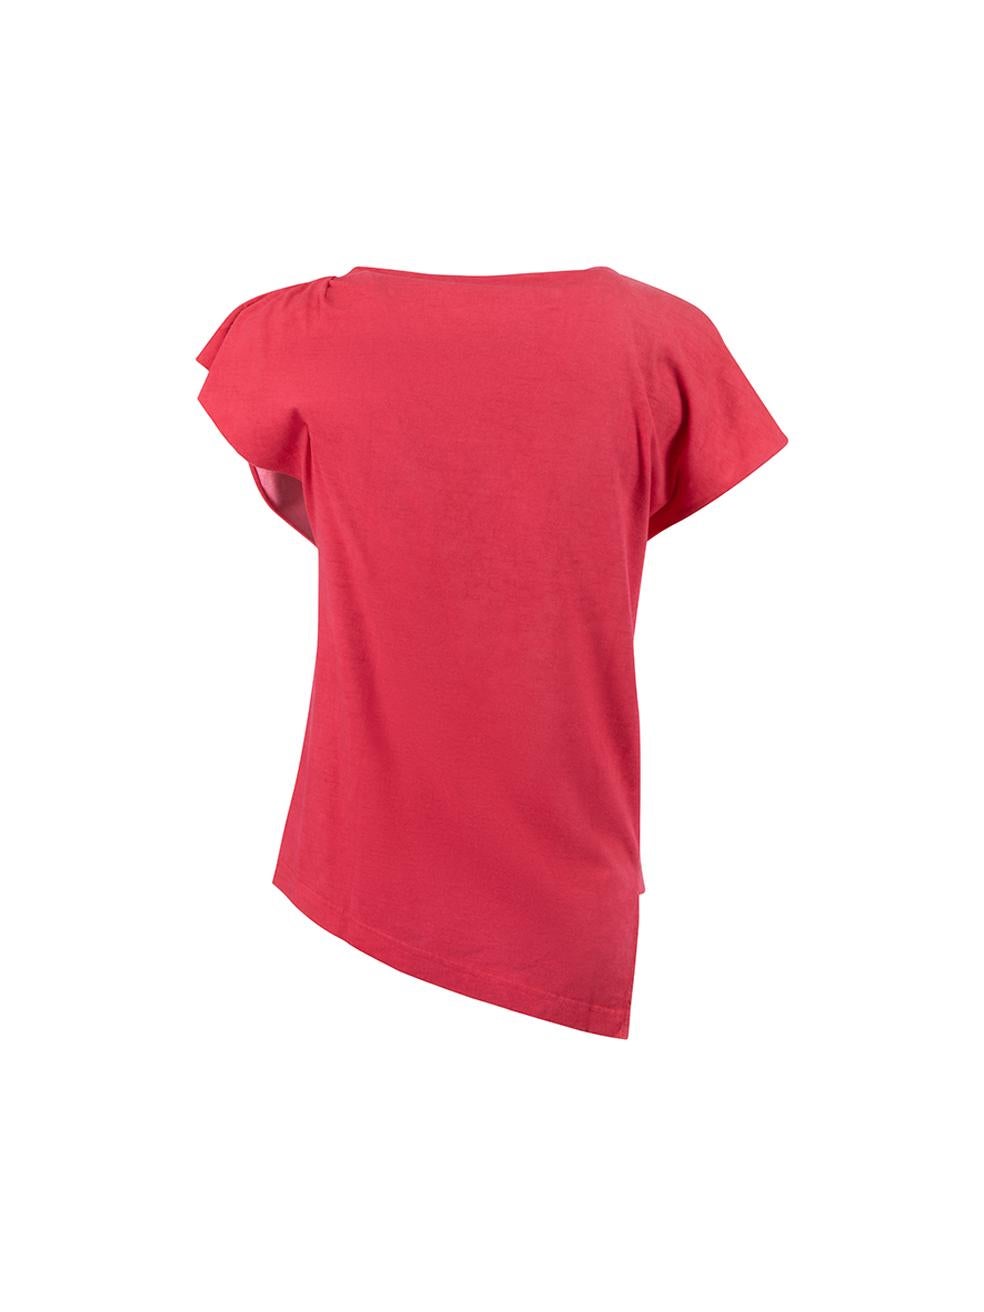 Pink Cap Sleeve Asymmetric Top Size S In Good Condition For Sale In London, GB